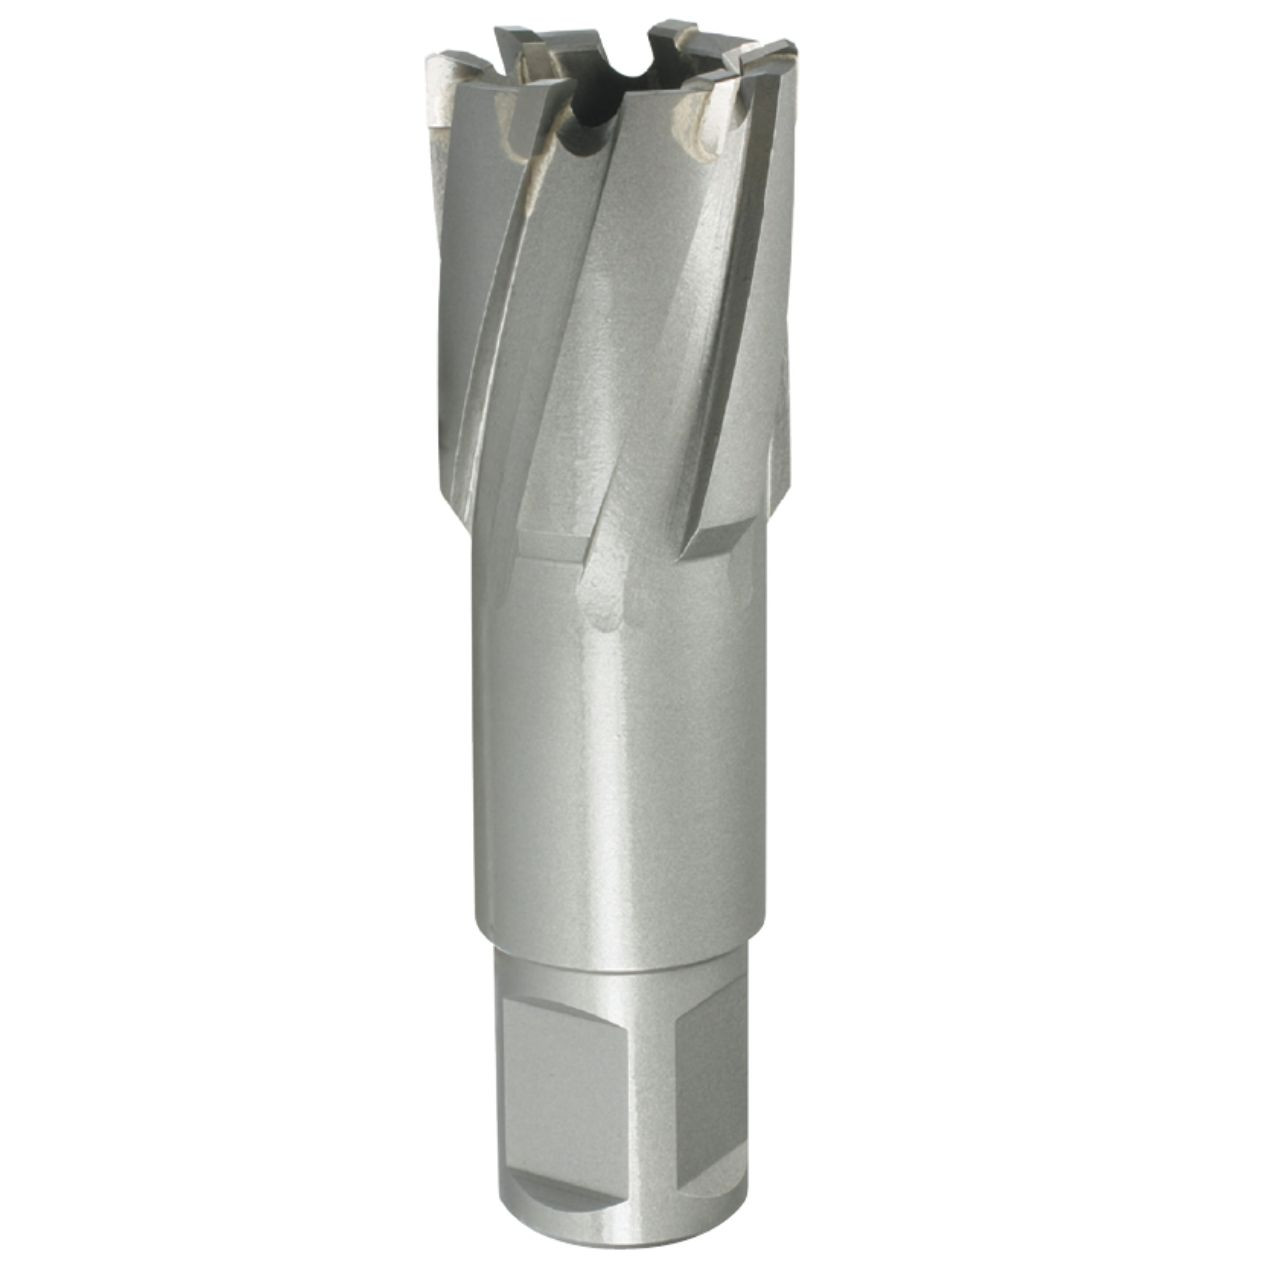 29 X 35 TCT Excision Core Drill